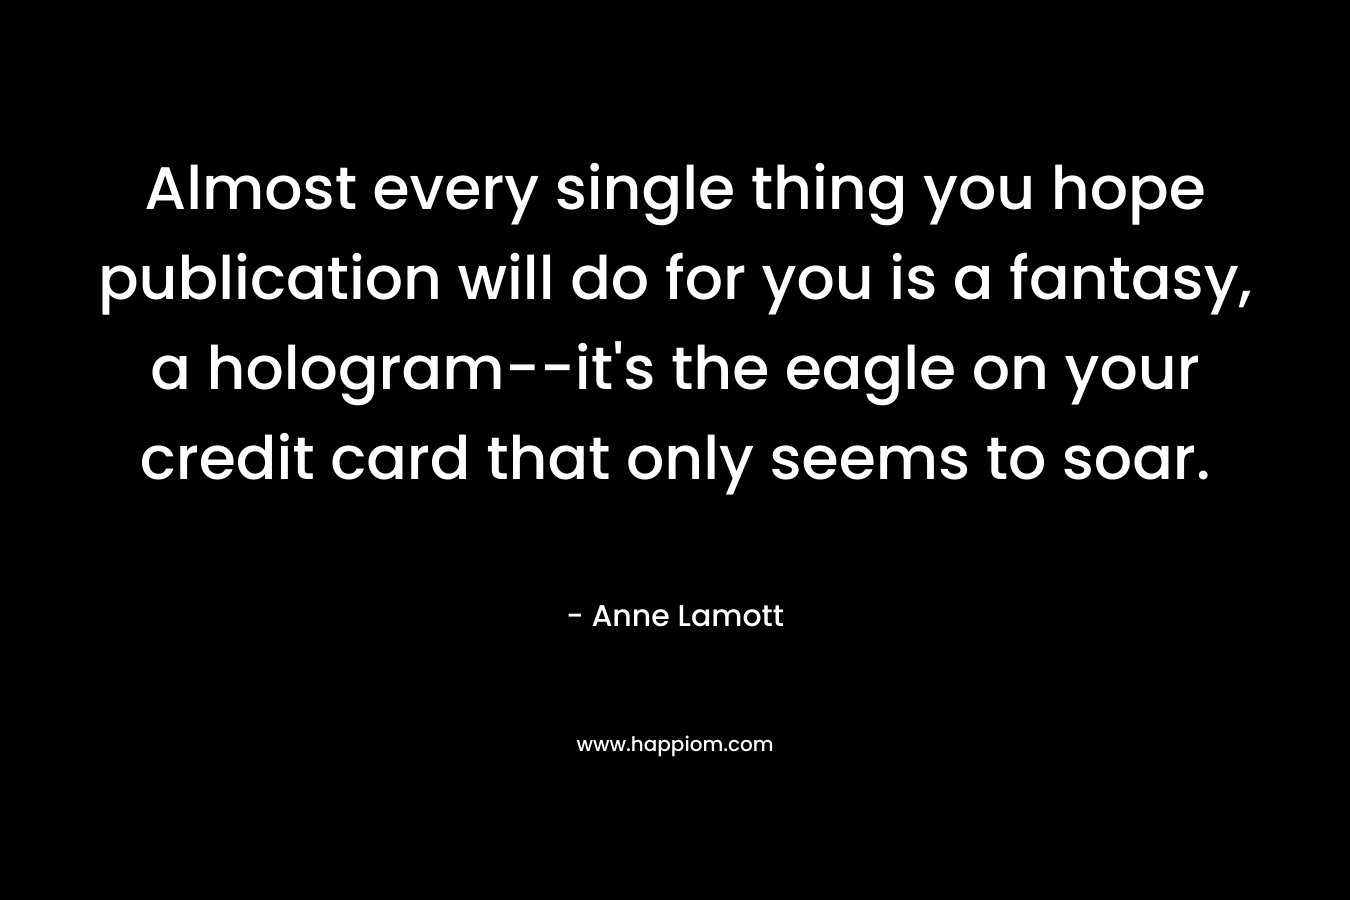 Almost every single thing you hope publication will do for you is a fantasy, a hologram–it’s the eagle on your credit card that only seems to soar. – Anne Lamott